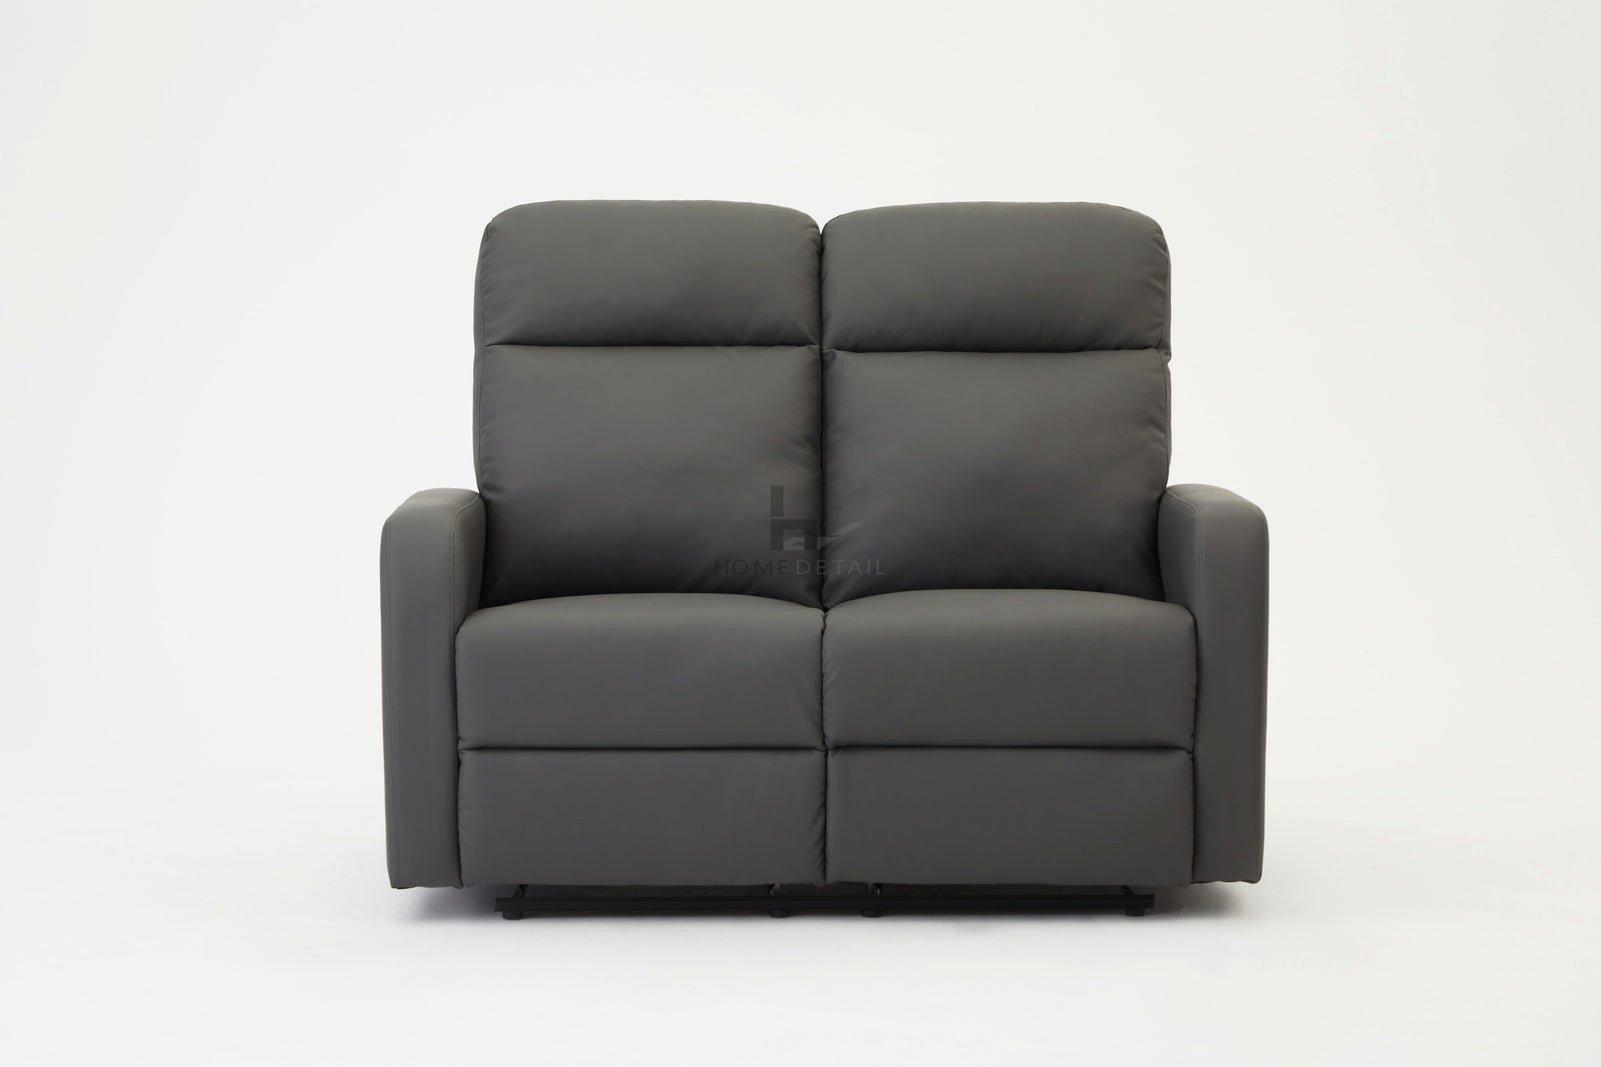 Mitchell Leather 2 Seater Recliner Sofa